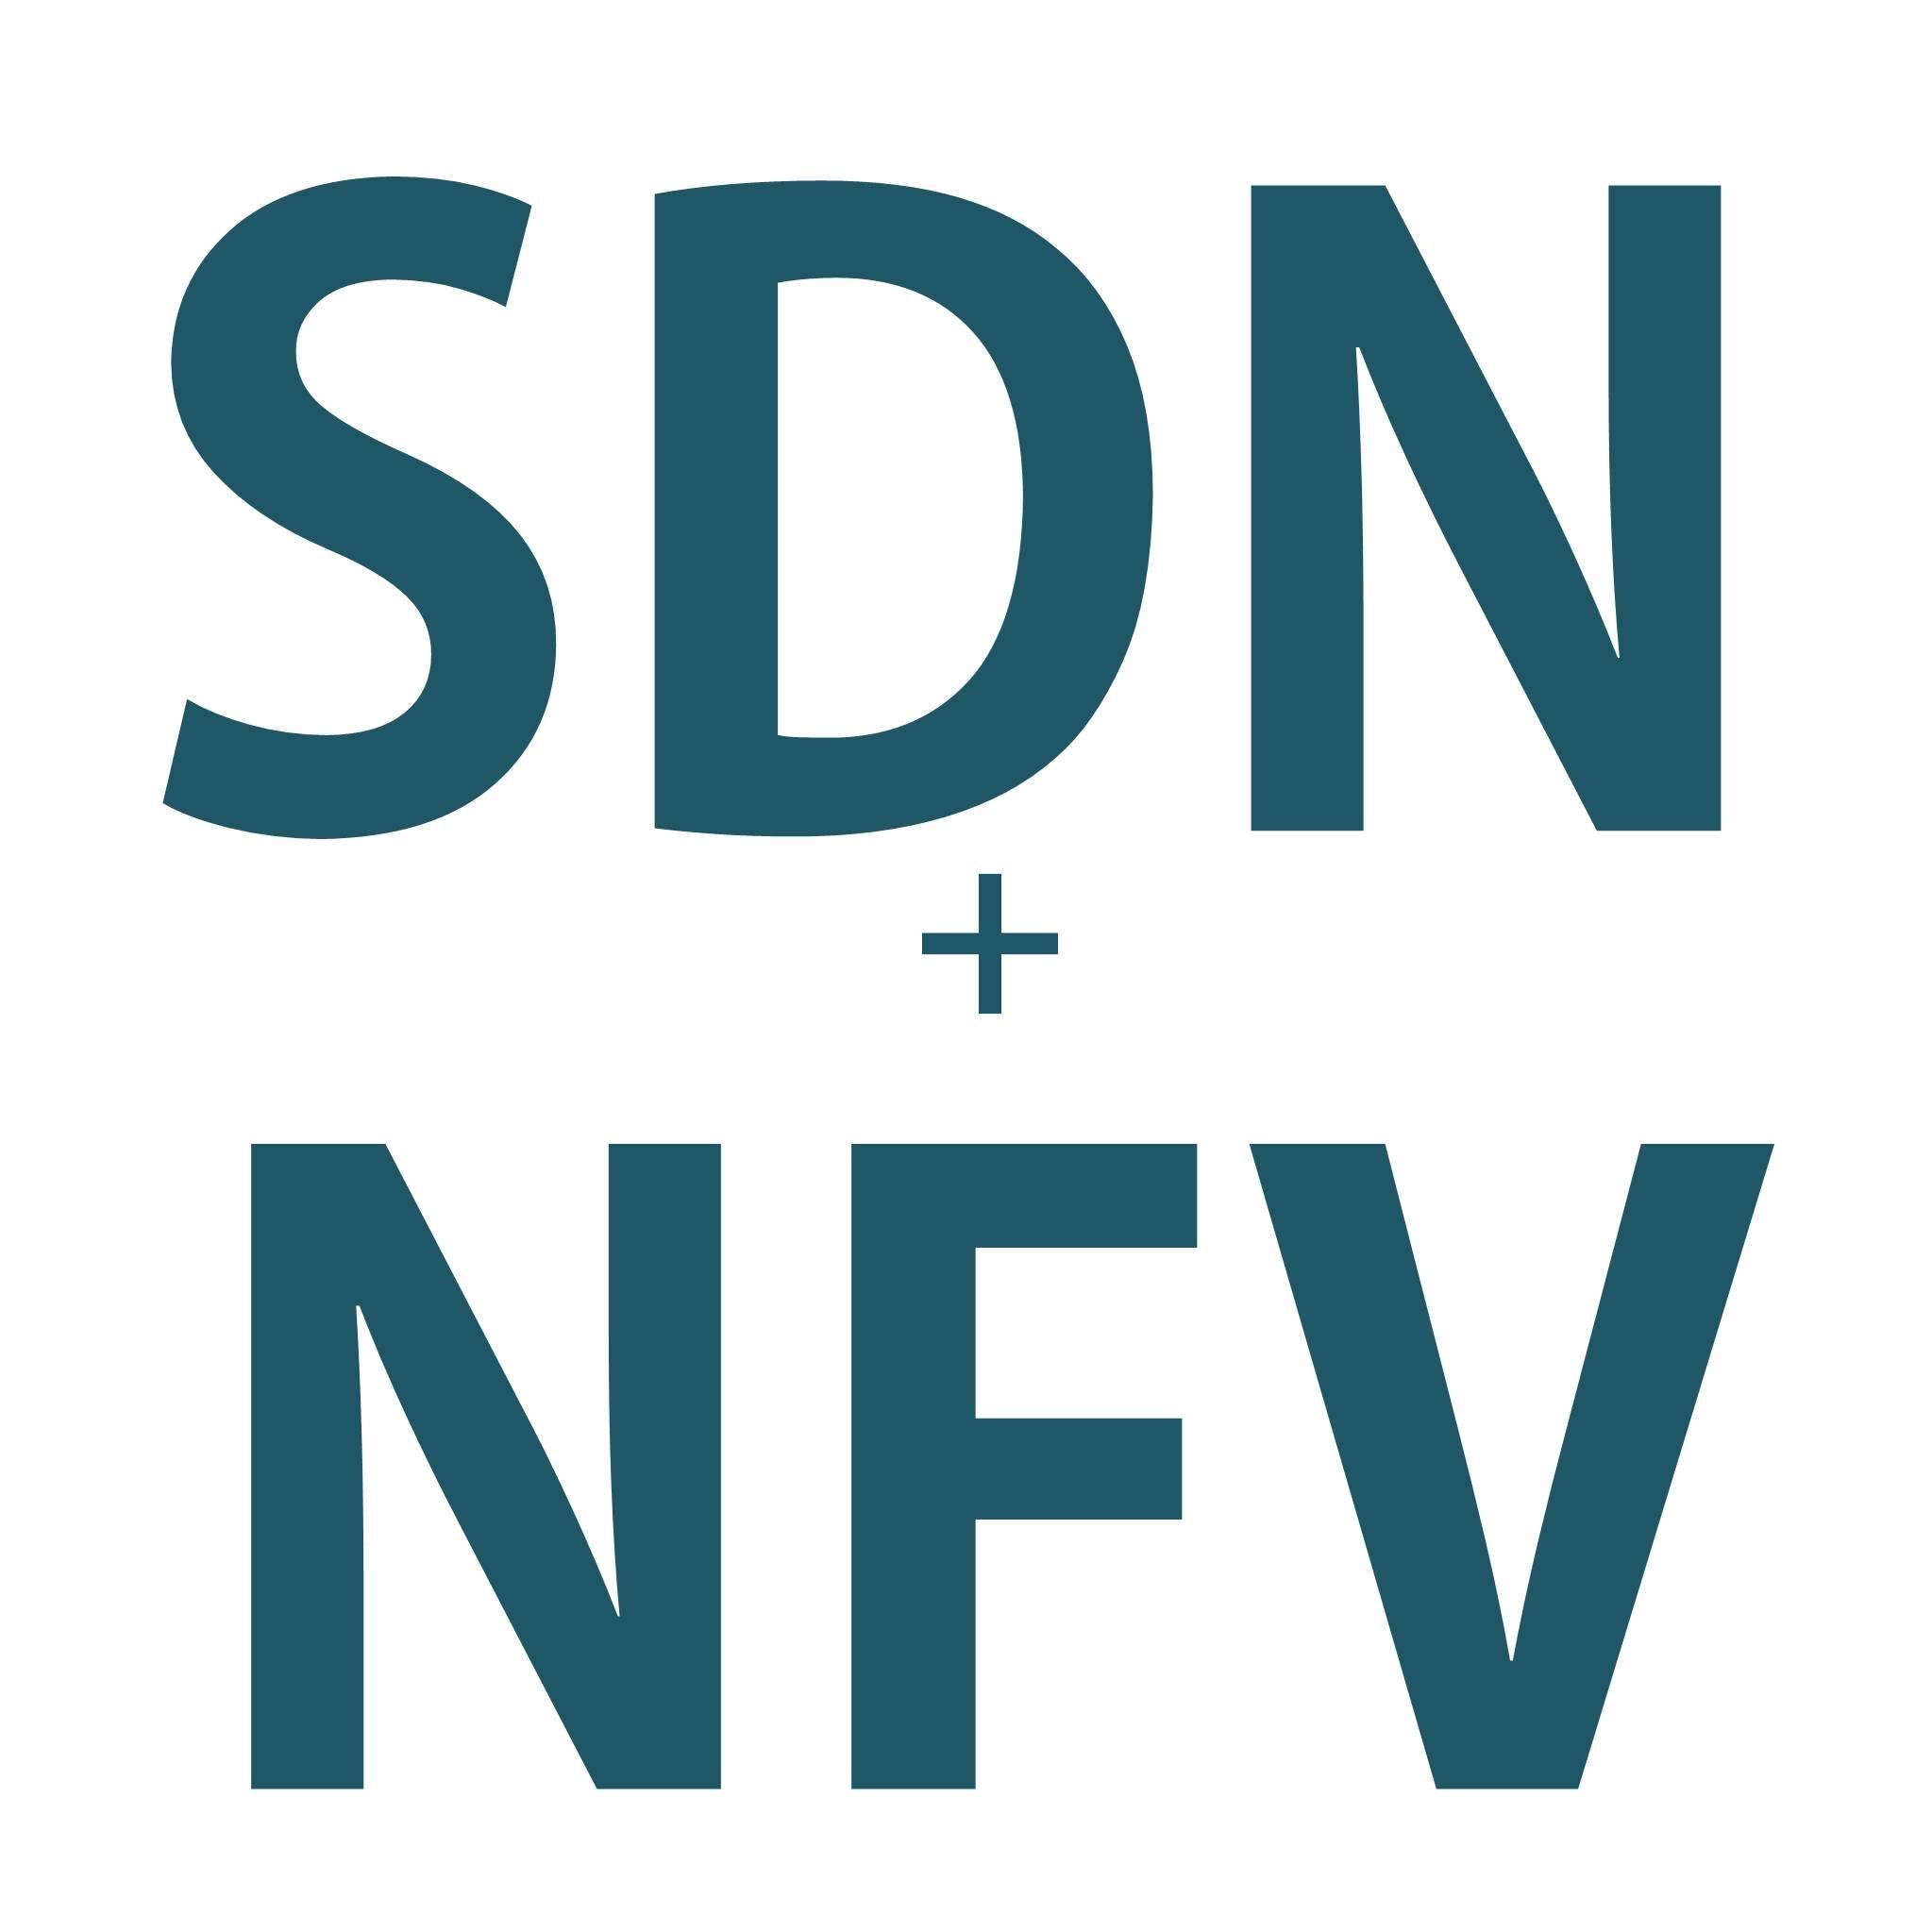 Software Defined Networking (SDN) and Network Functions Virtualization(NFV) Tech Channel #OpenStack #OpenDaylight #ONOS #OPNFV #OpenMANO